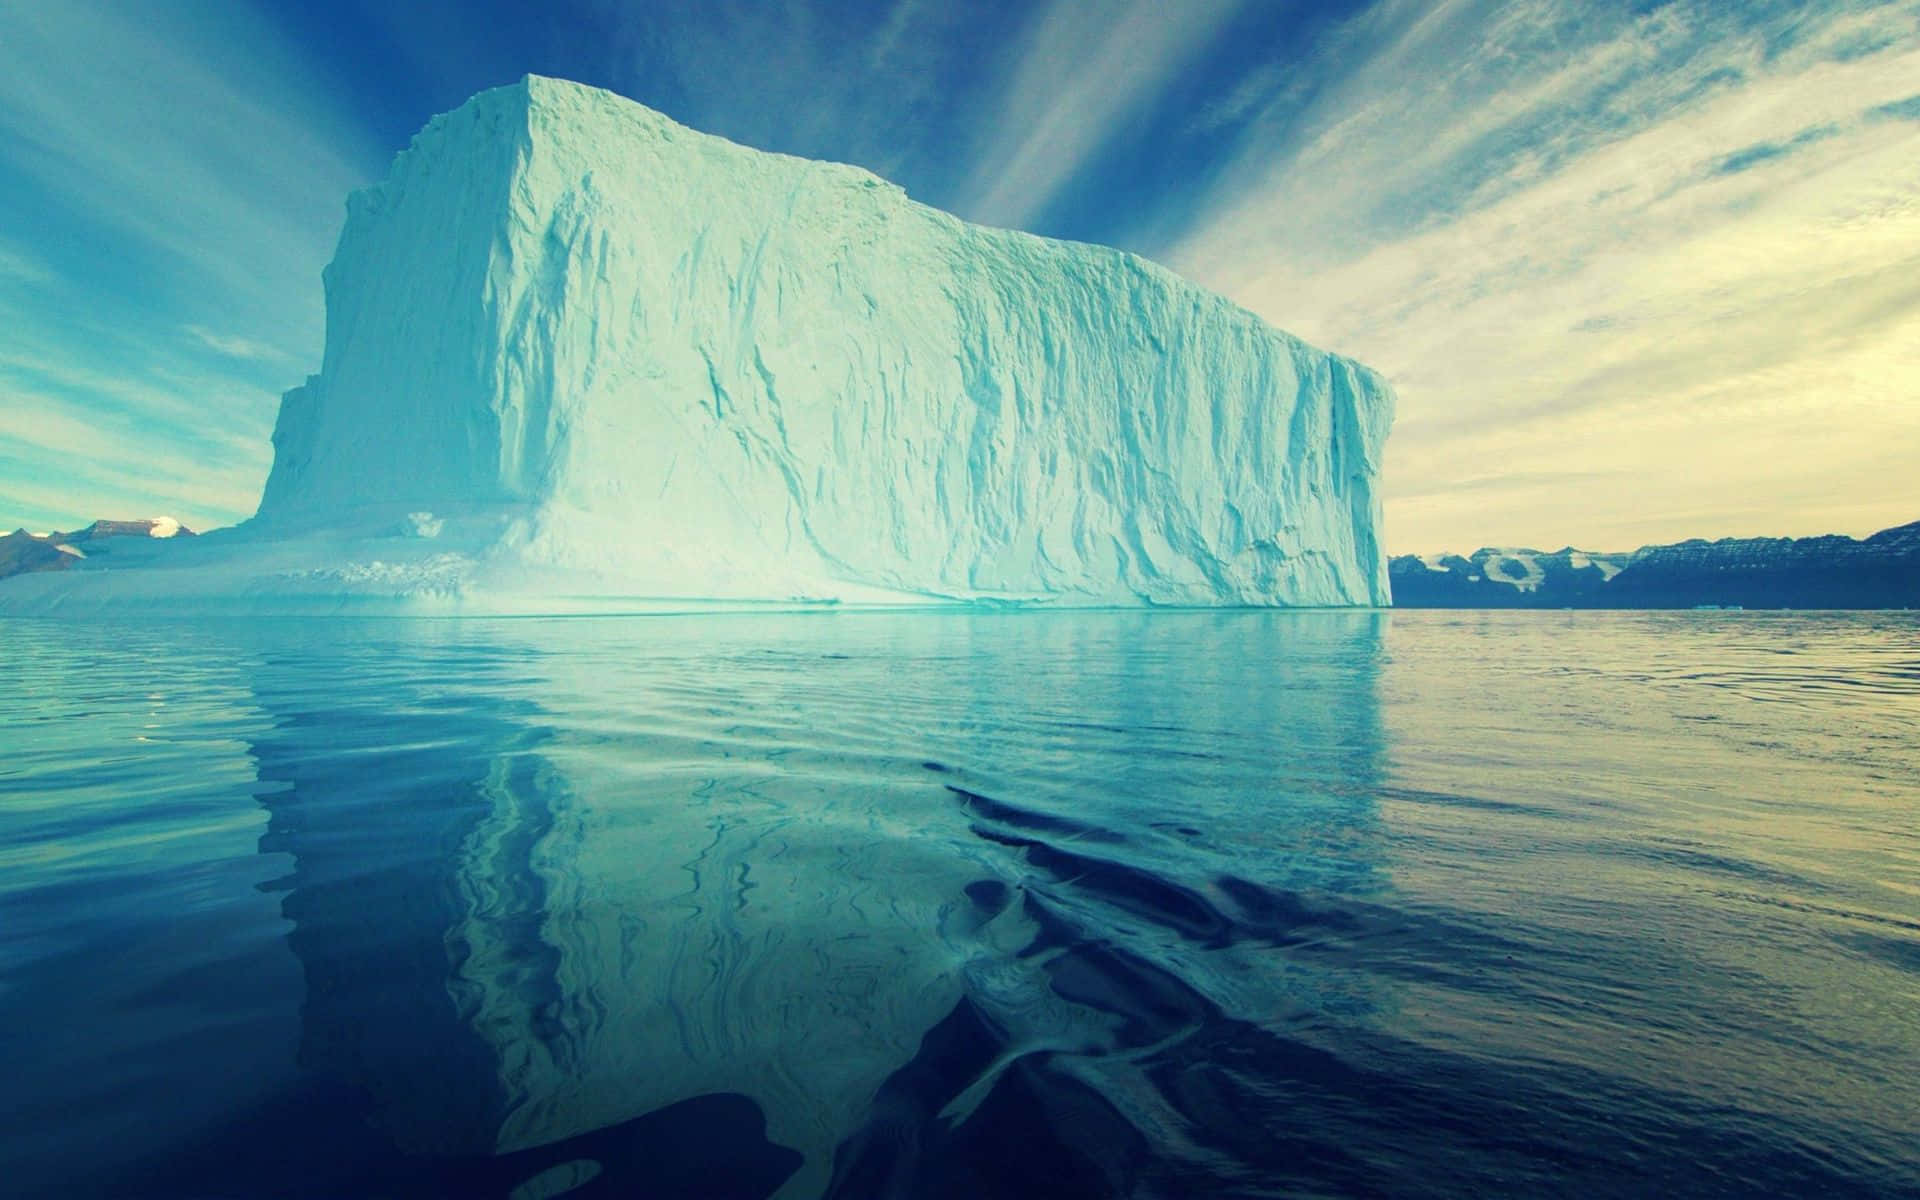 A mesmerizing view of an Iceberg in the middle of the ocean Wallpaper